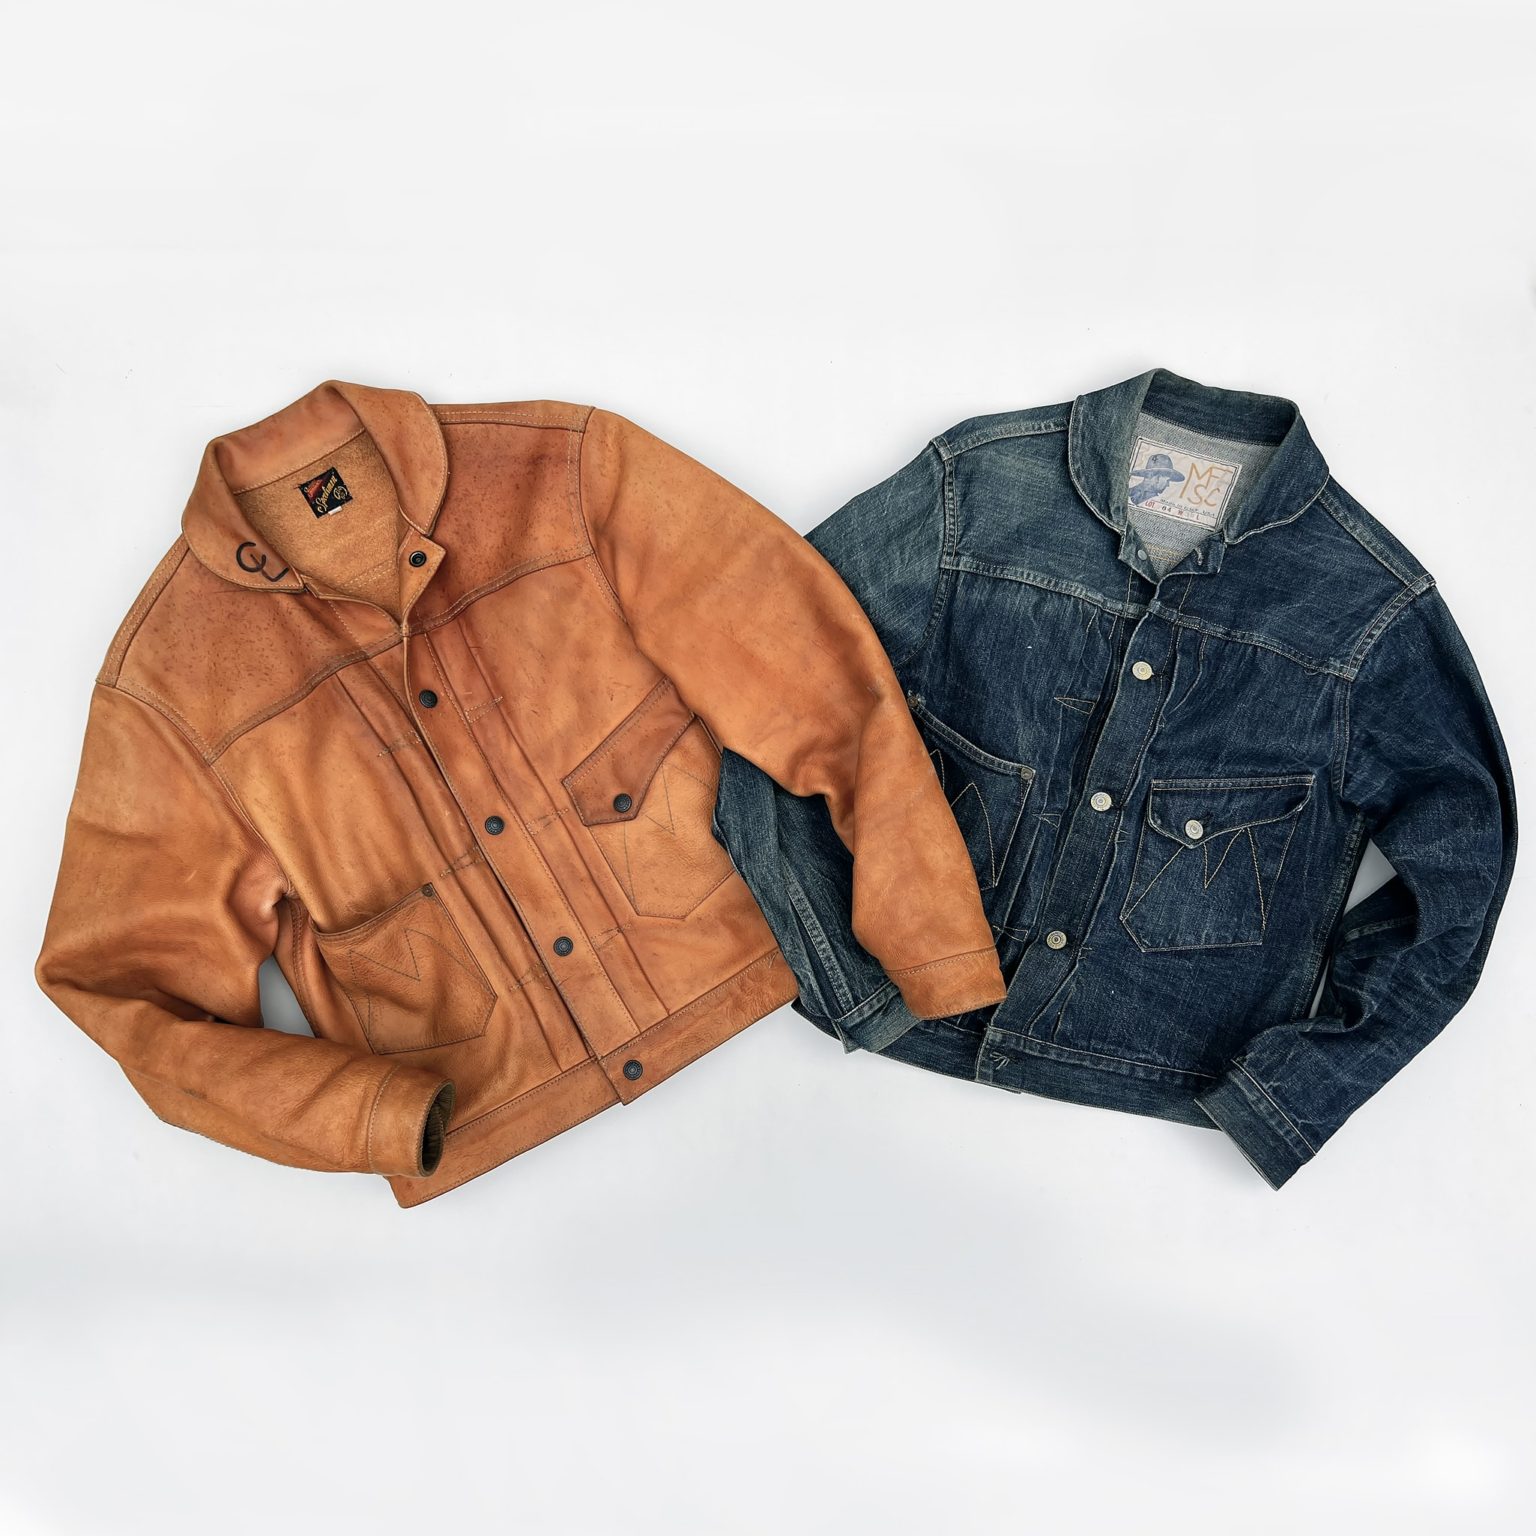 Mister Freedom® RANCH BLOUSE “Randall” & CAMPUS BLOUSE “Midnight denim ...